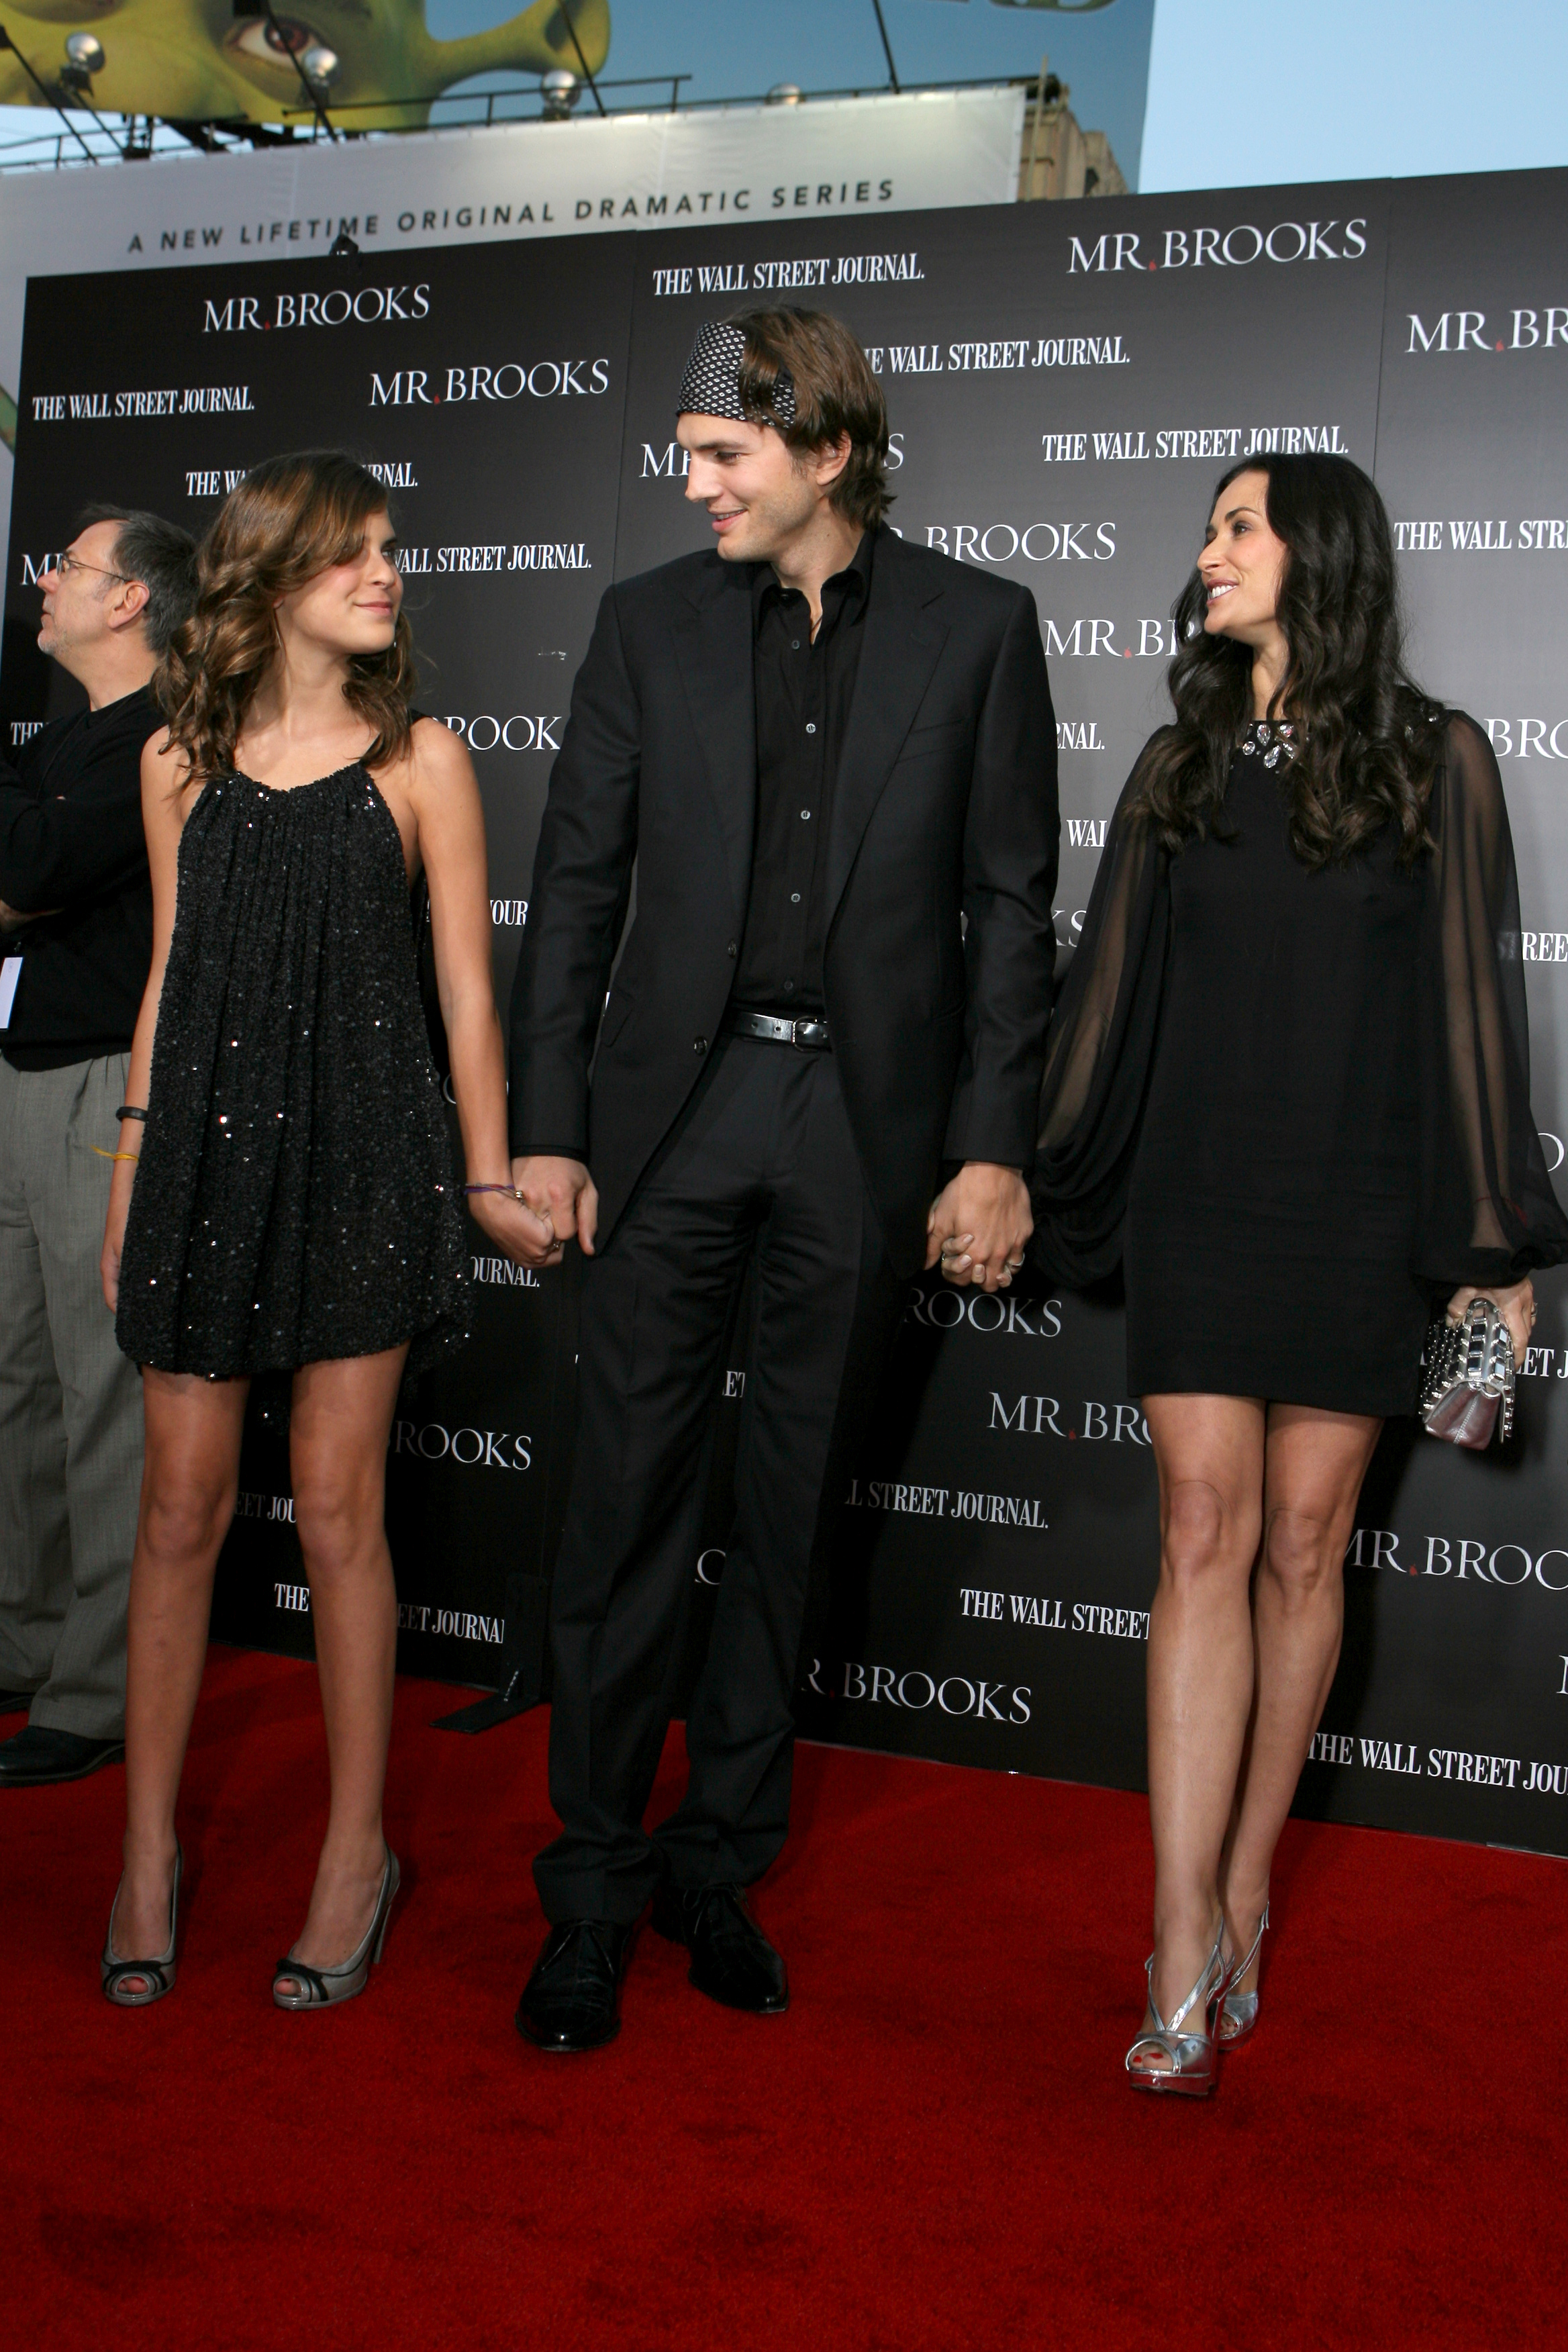 Tallulah Belle Willis, Ashton Kutcher, and Demi Moore at the "Mr. Brooks" Los Angeles premiere on May 22, 2007 | Source: Getty Images